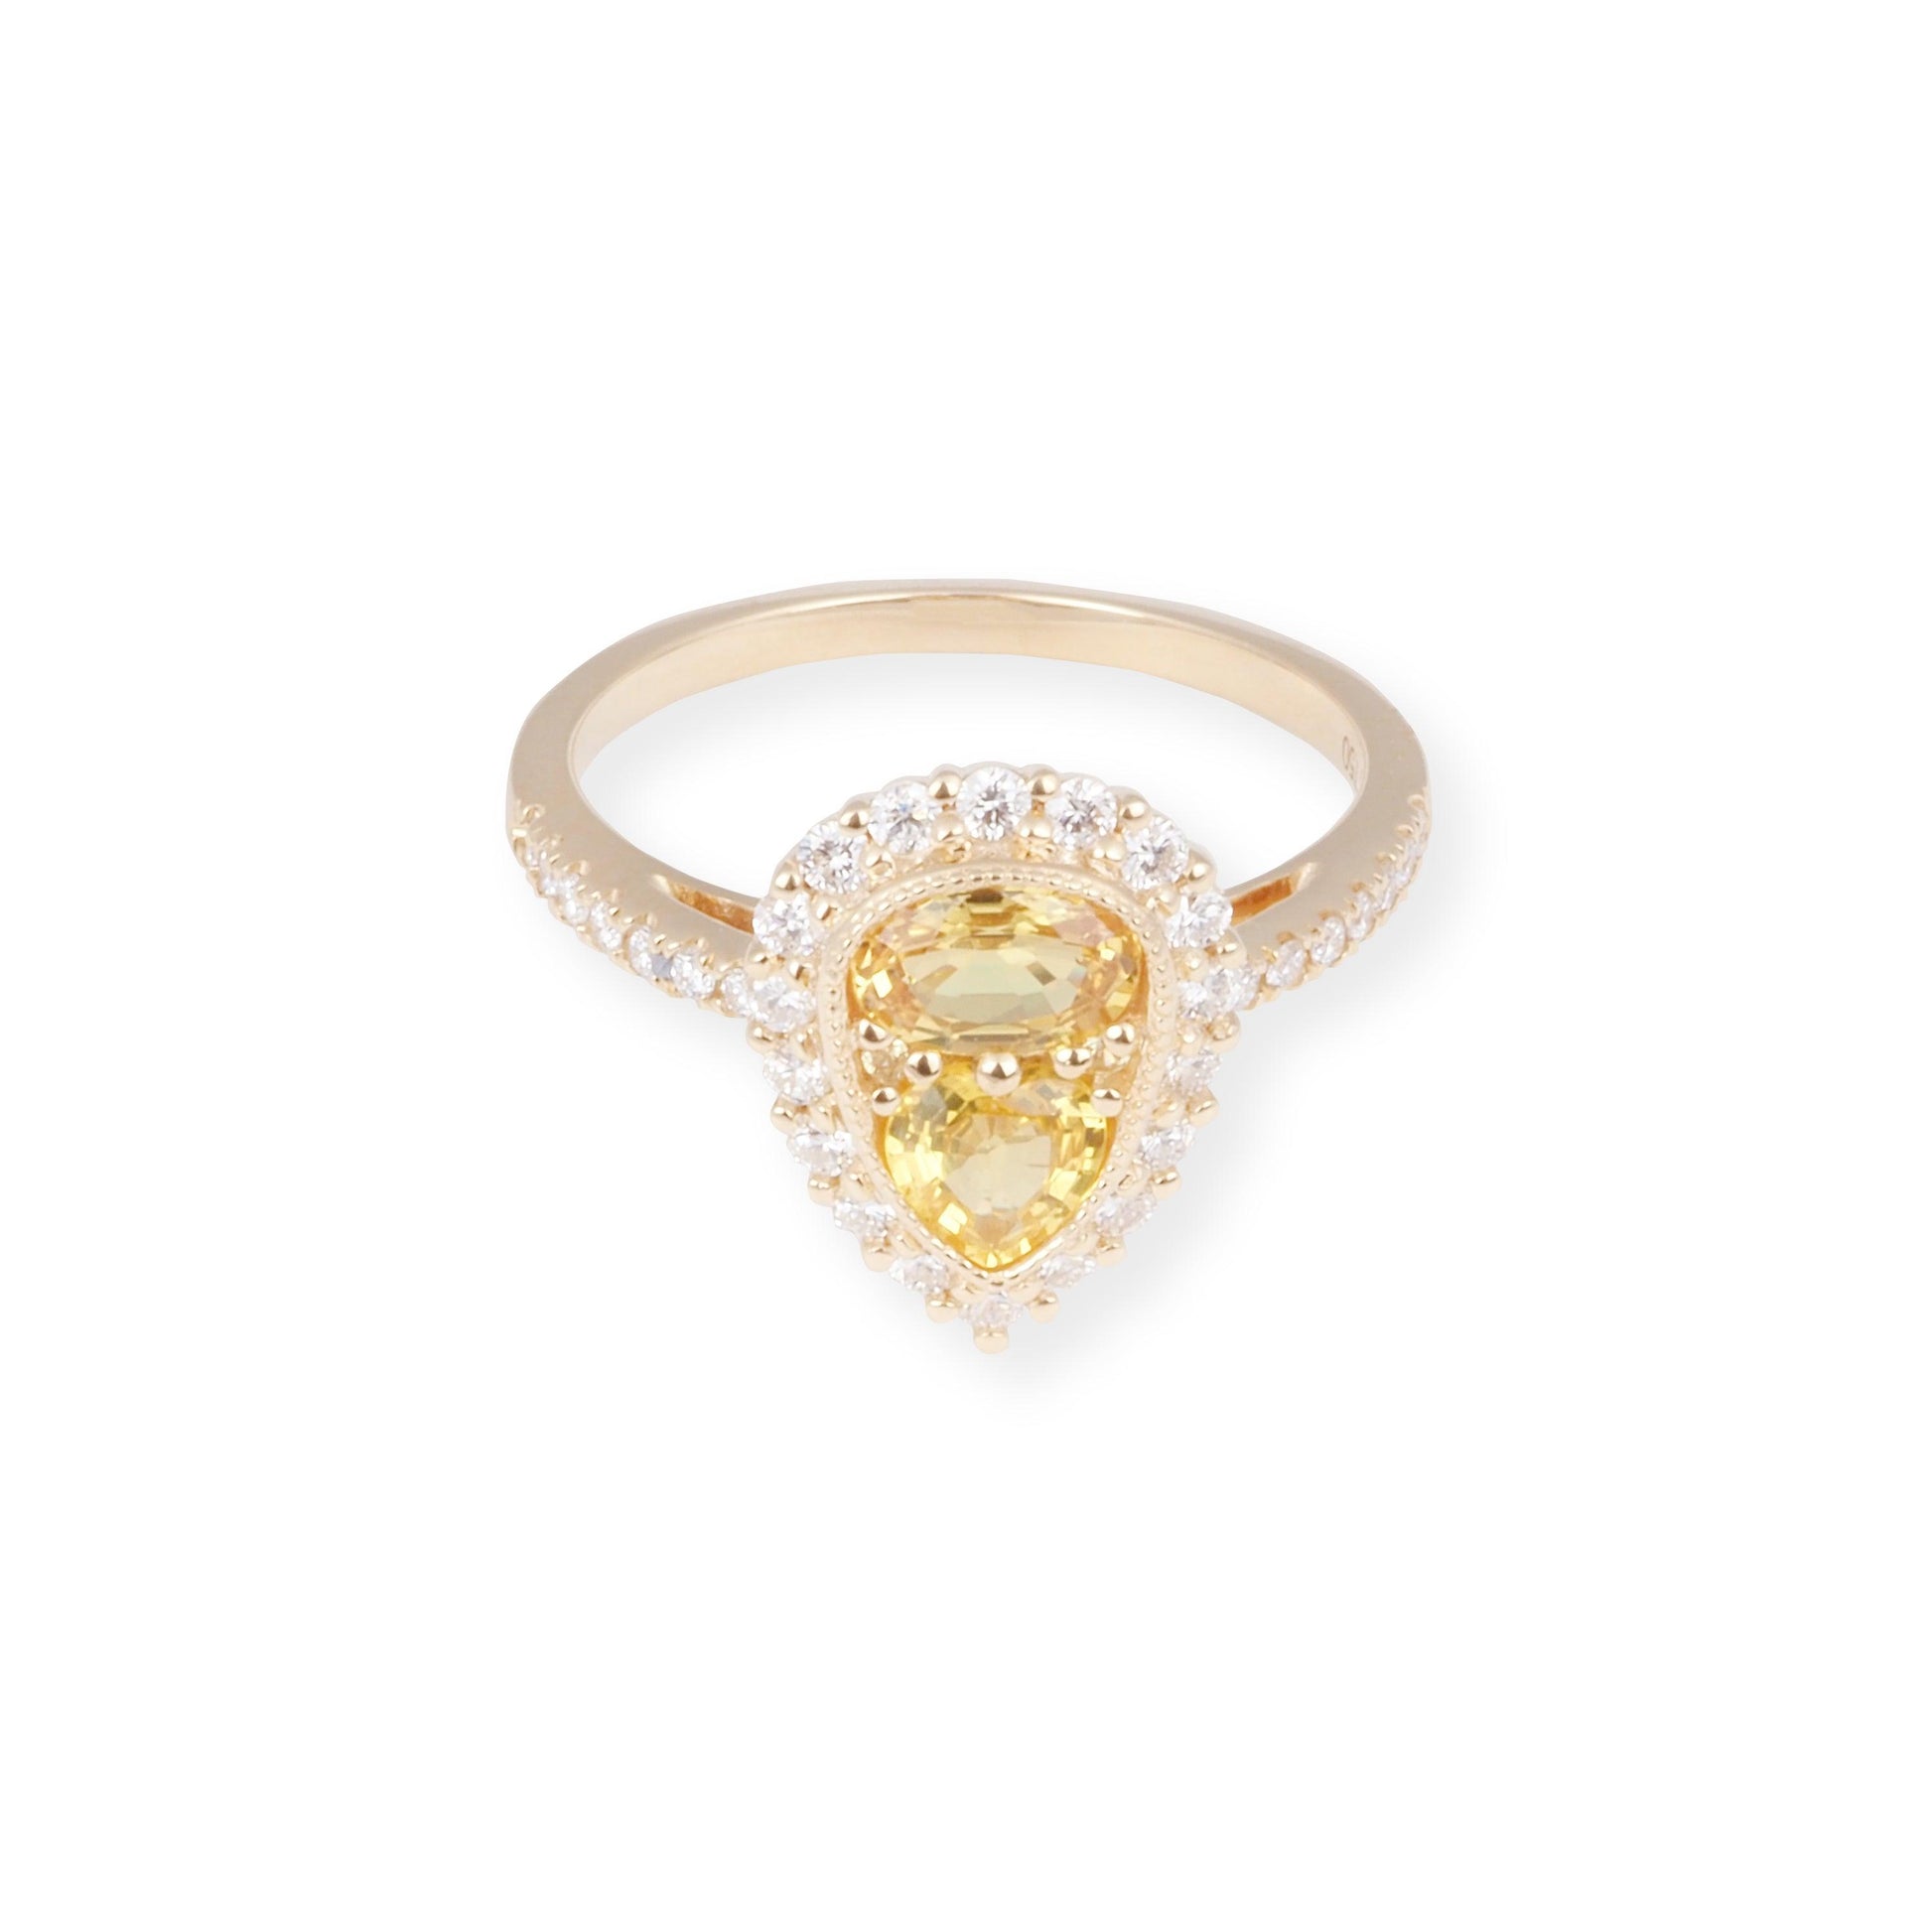 18ct Yellow Gold Ring With Yellow Sapphire LR-7042 - Minar Jewellers